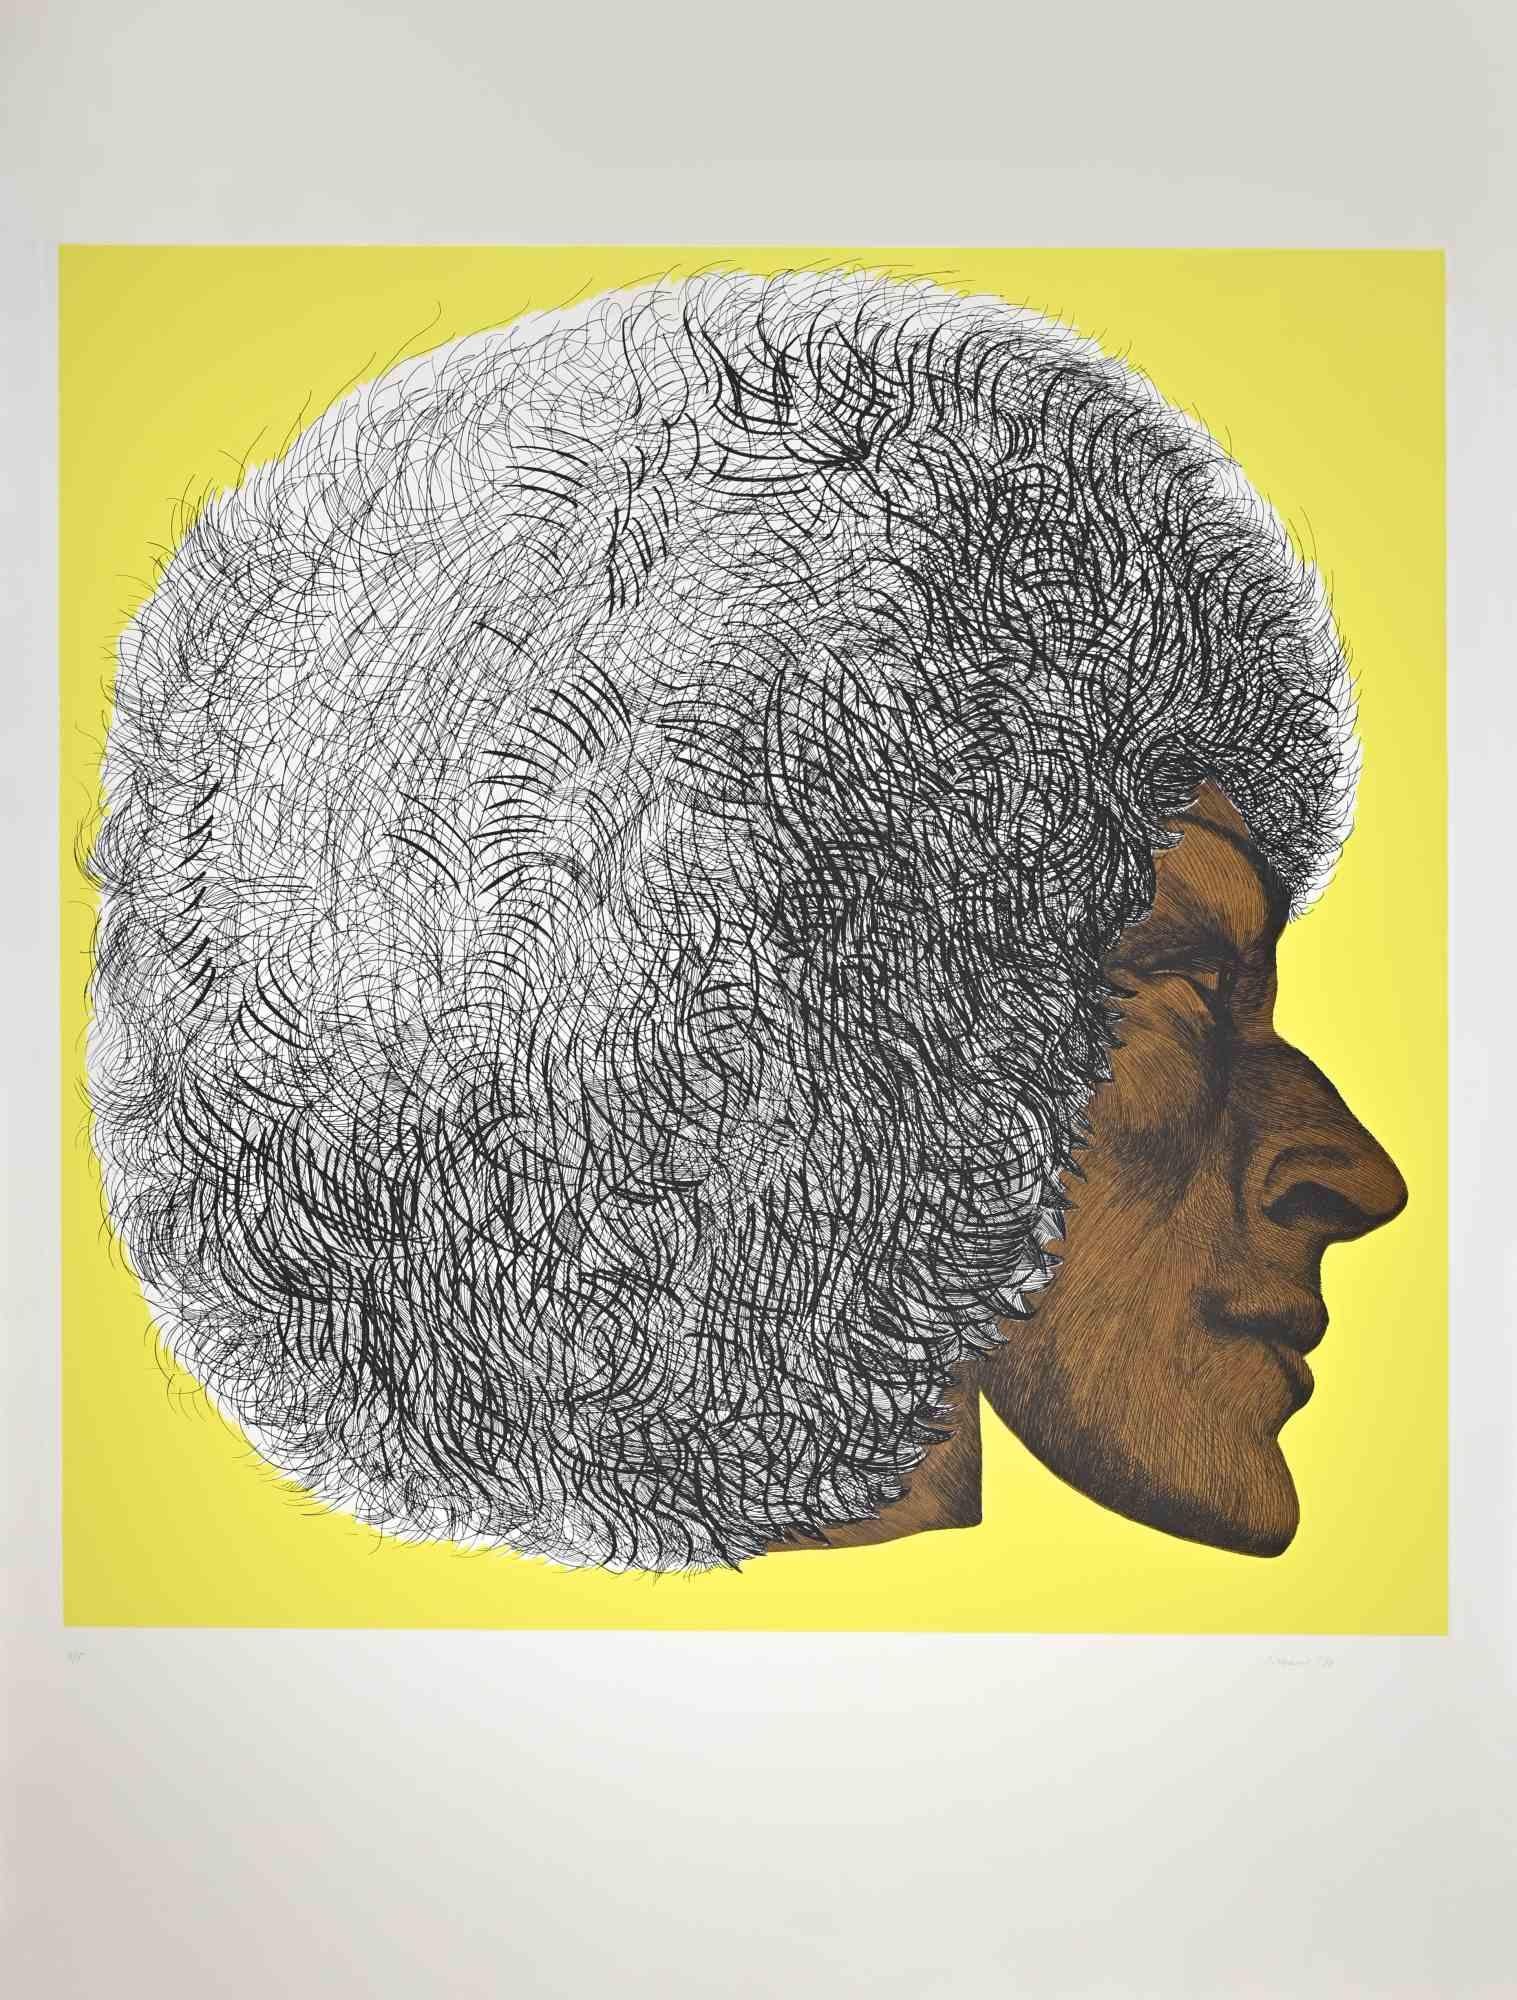 Profile Yellow II - Profilo giallo II is a contemporary artwork realized by Giacomo Porzano in 1972.

Hand signed and dated by artist with pencil.

Numbered on the lower margin. Edition of 4/5